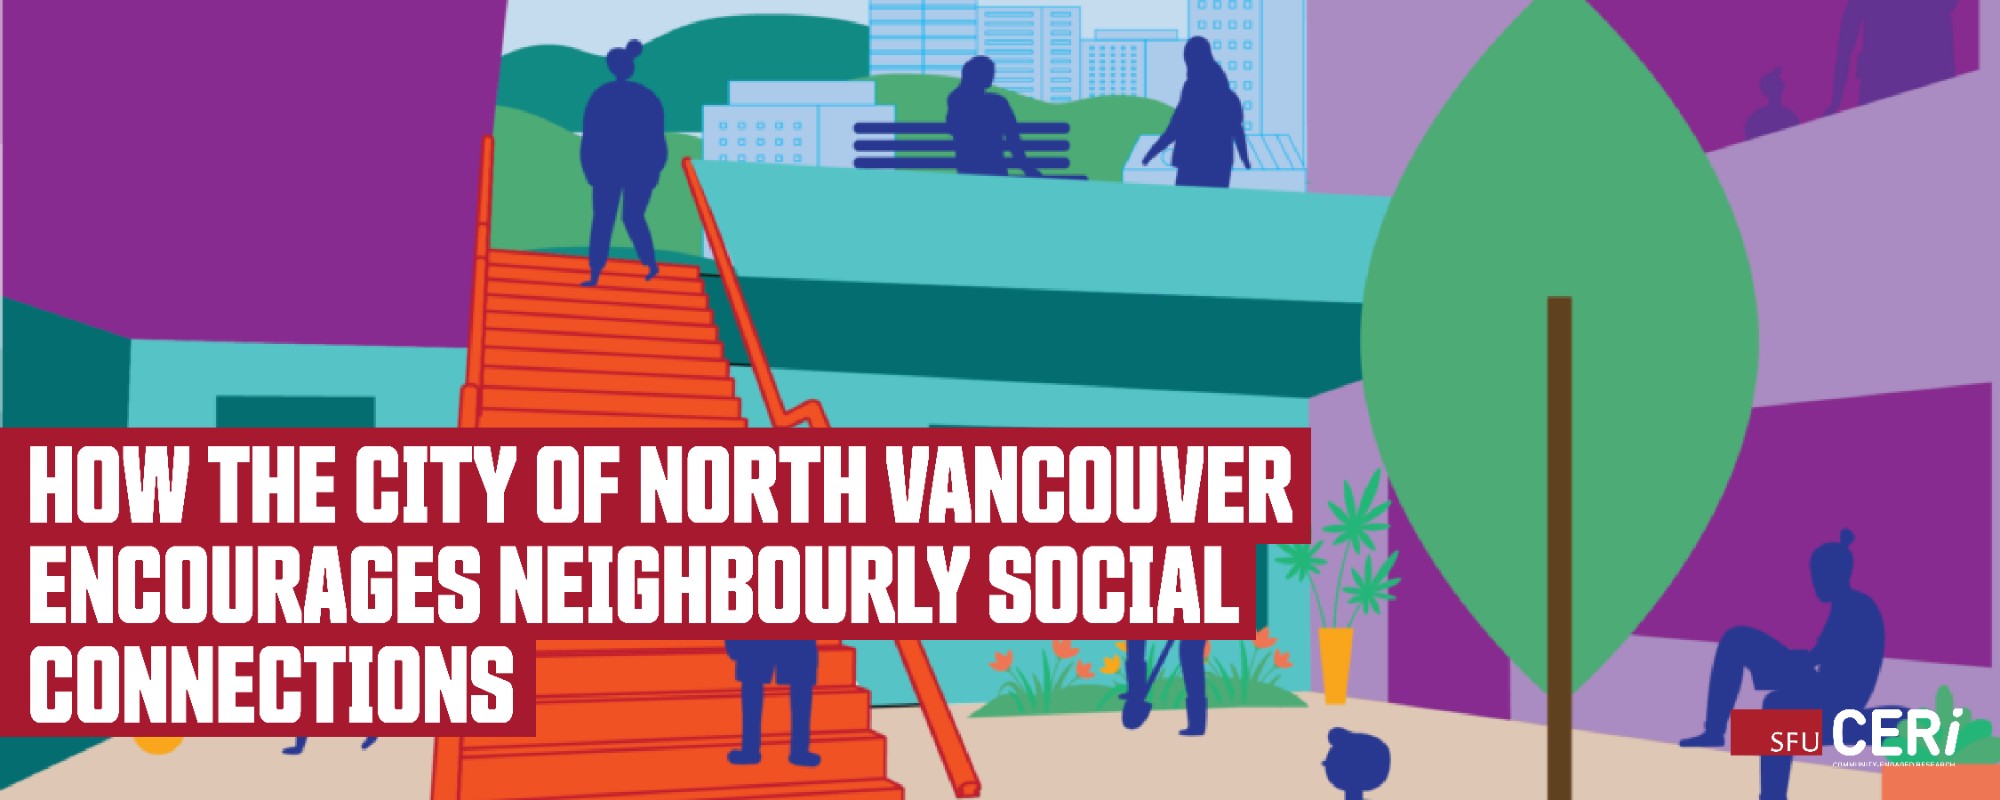 How the City of North Vancouver encourages neighbourly social connections